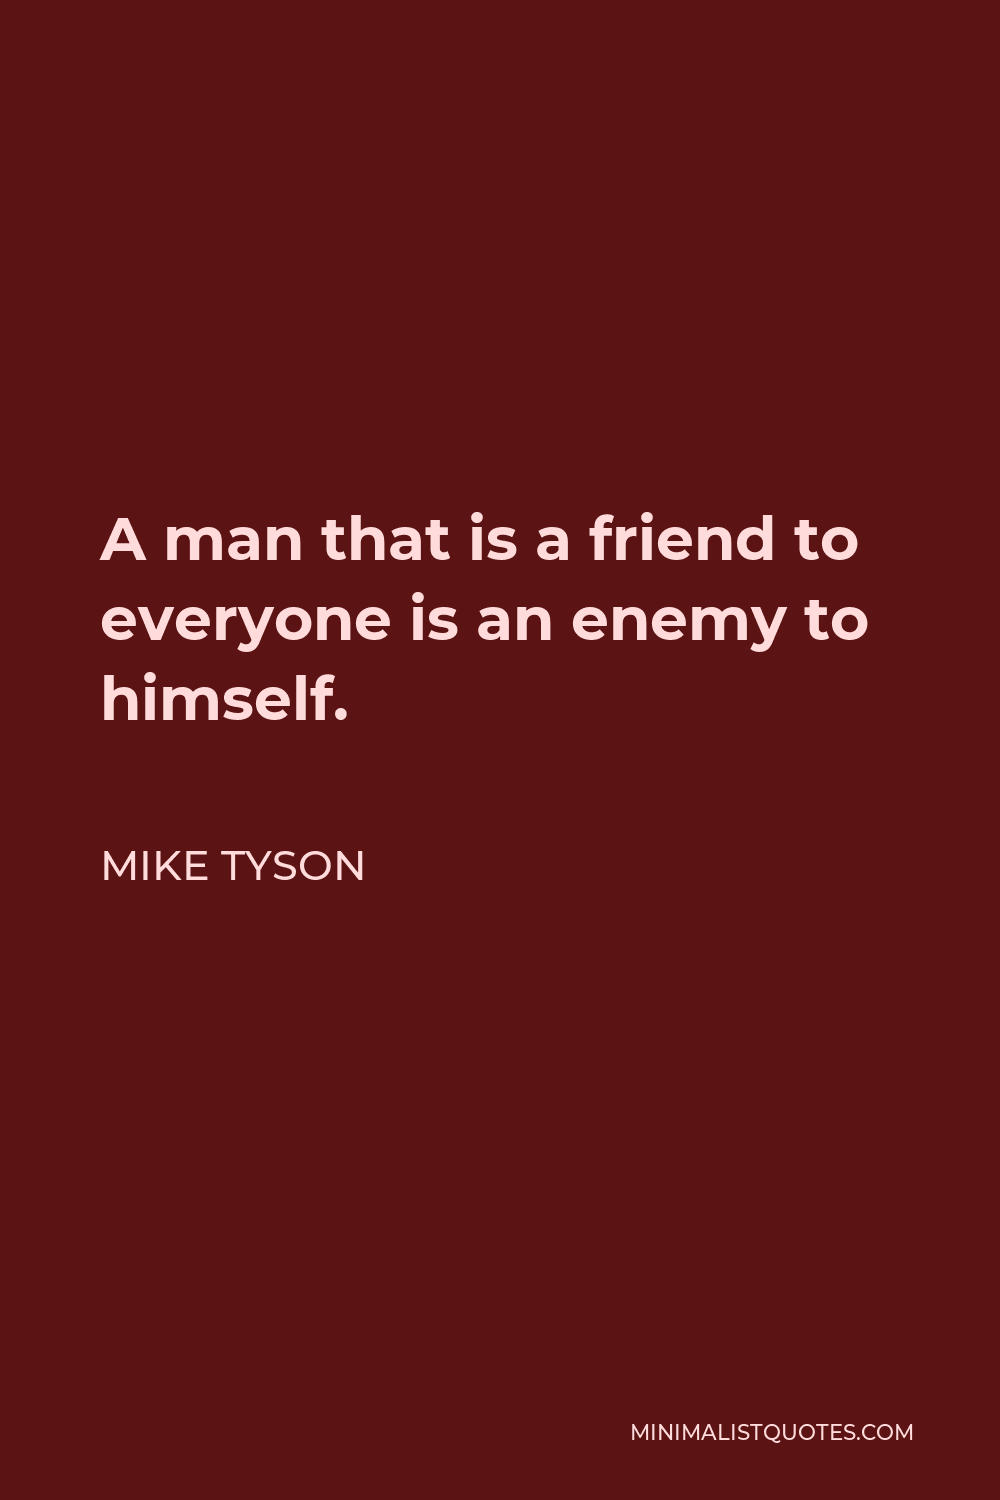 Mike Tyson Quote - A man that is a friend to everyone is an enemy to himself.